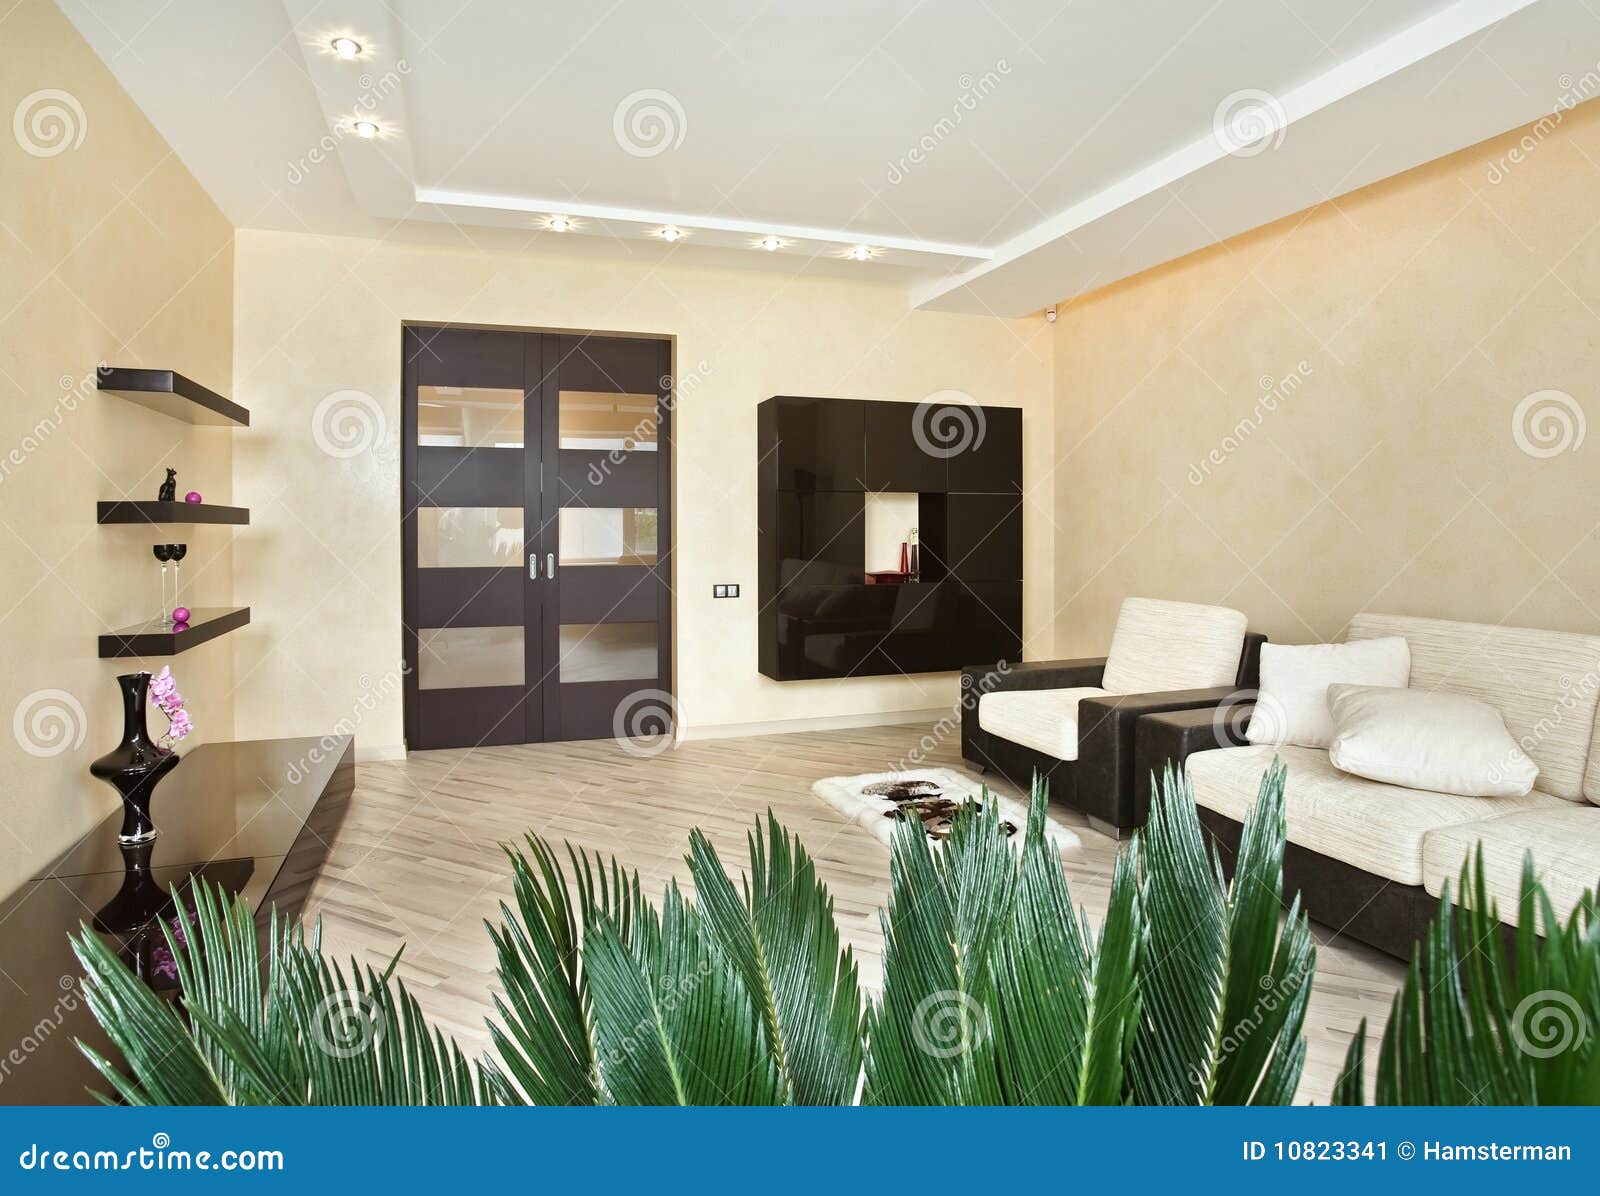 Modern Drawing room Interior in Warm Tones Stock Image   Image of ...